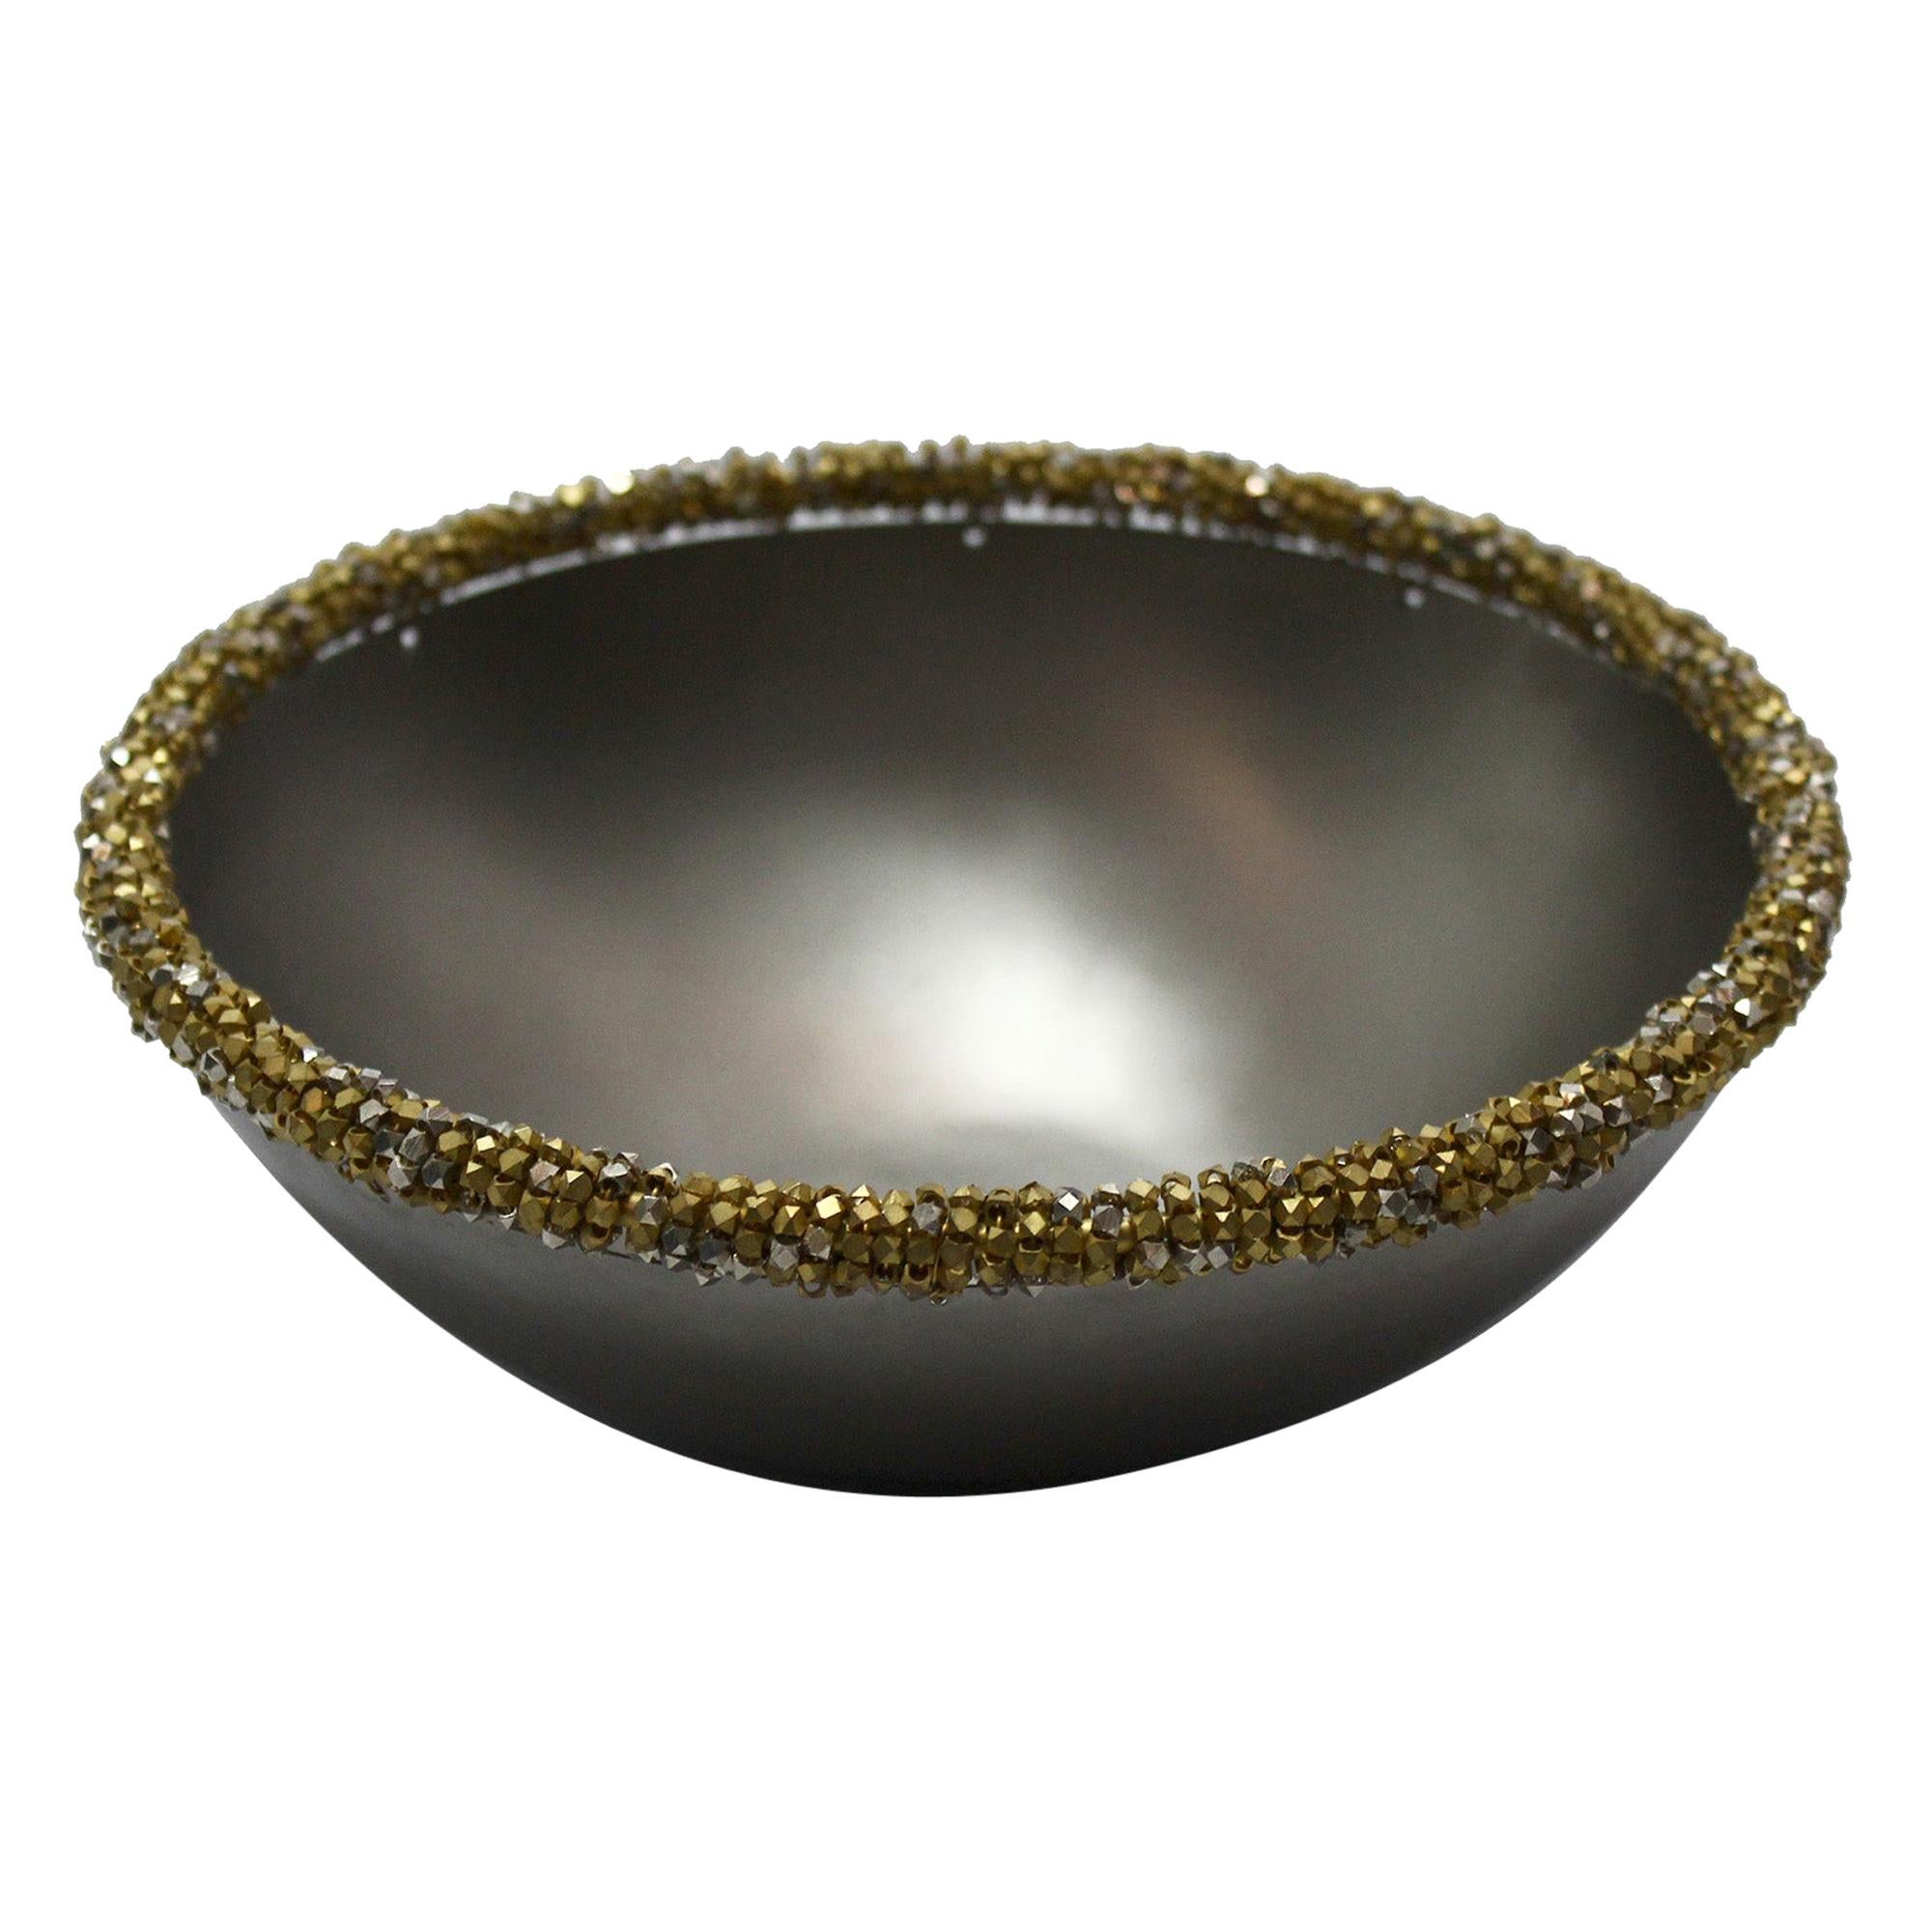 Mauna Bowl in Silver and Gold Steel by CuratedKravet